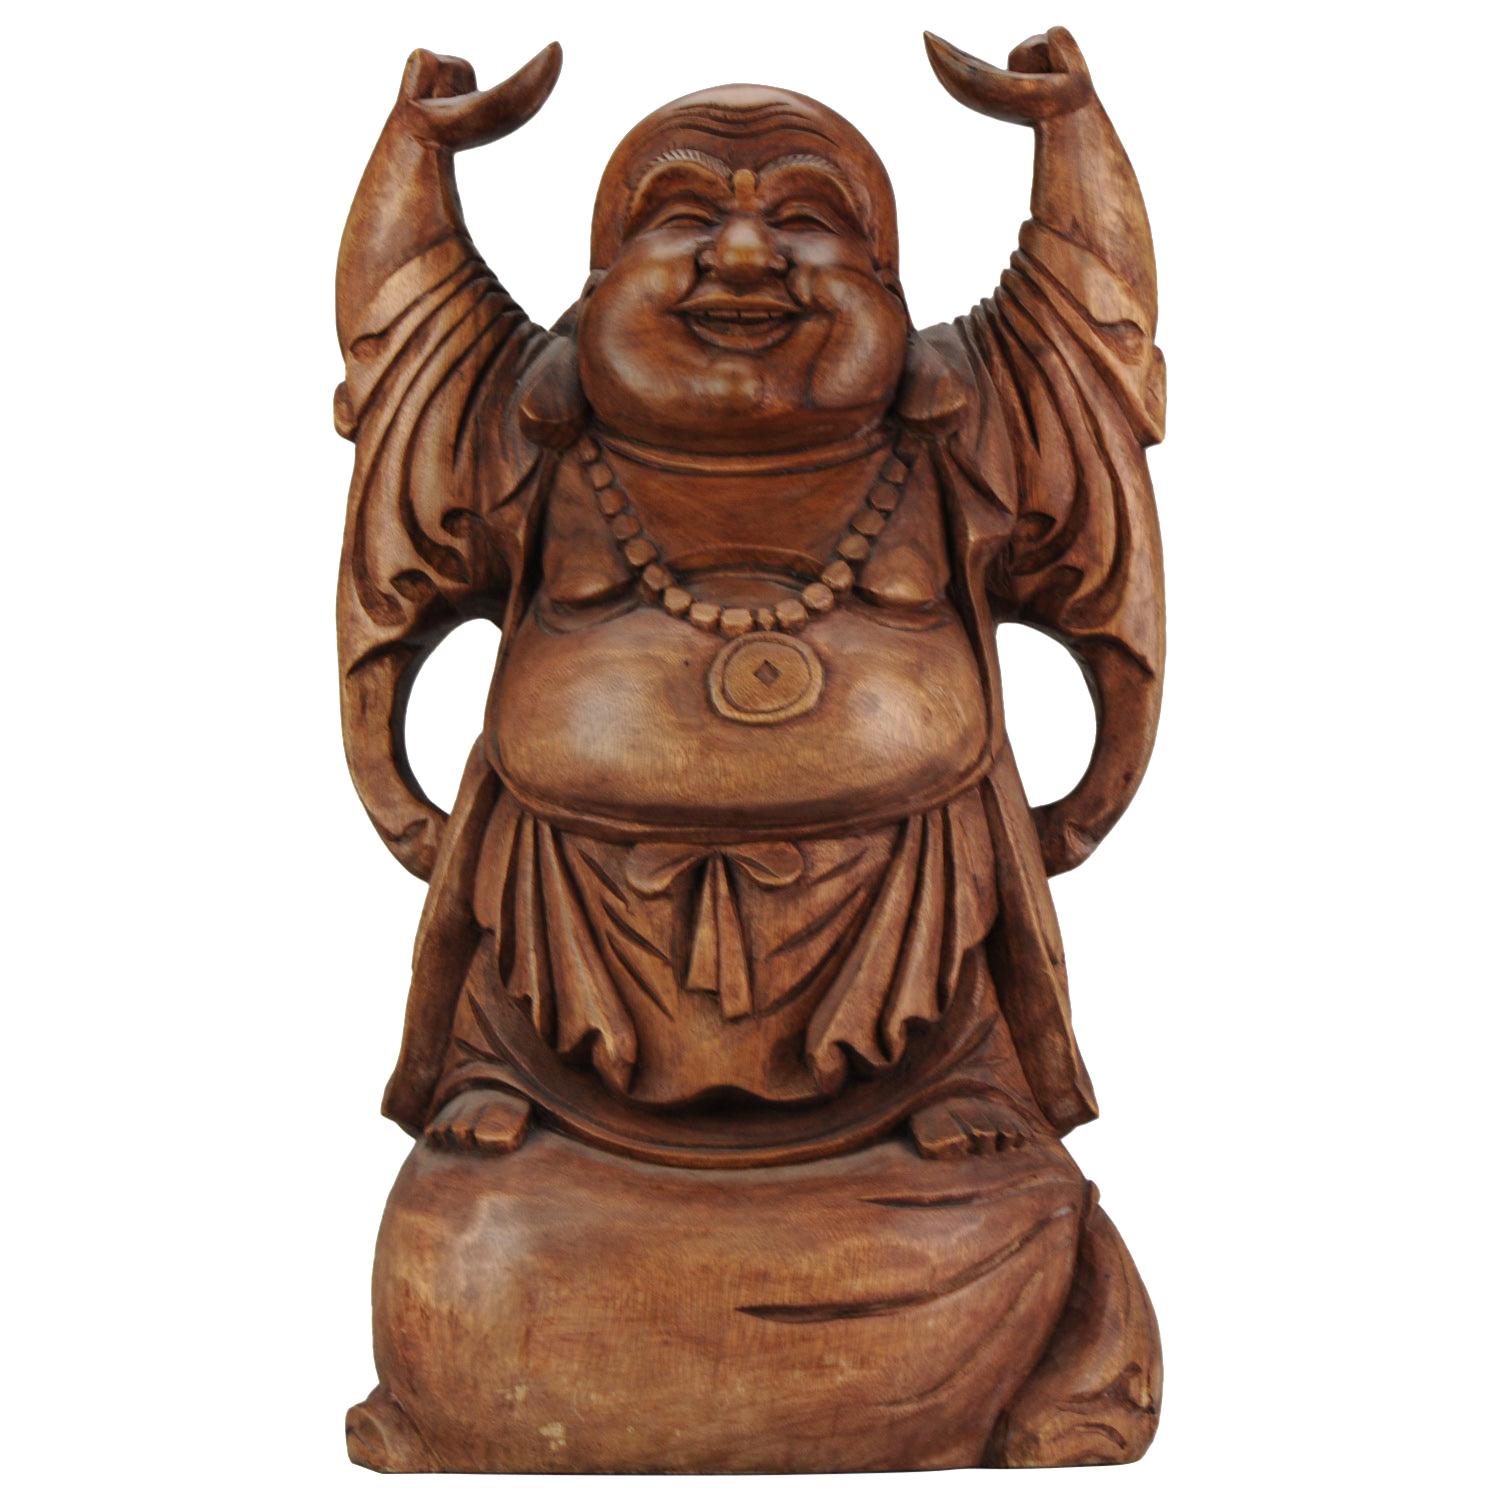 Huge 20C Chinese Carved Wood Statue of a Laughing Buddha Great Carving